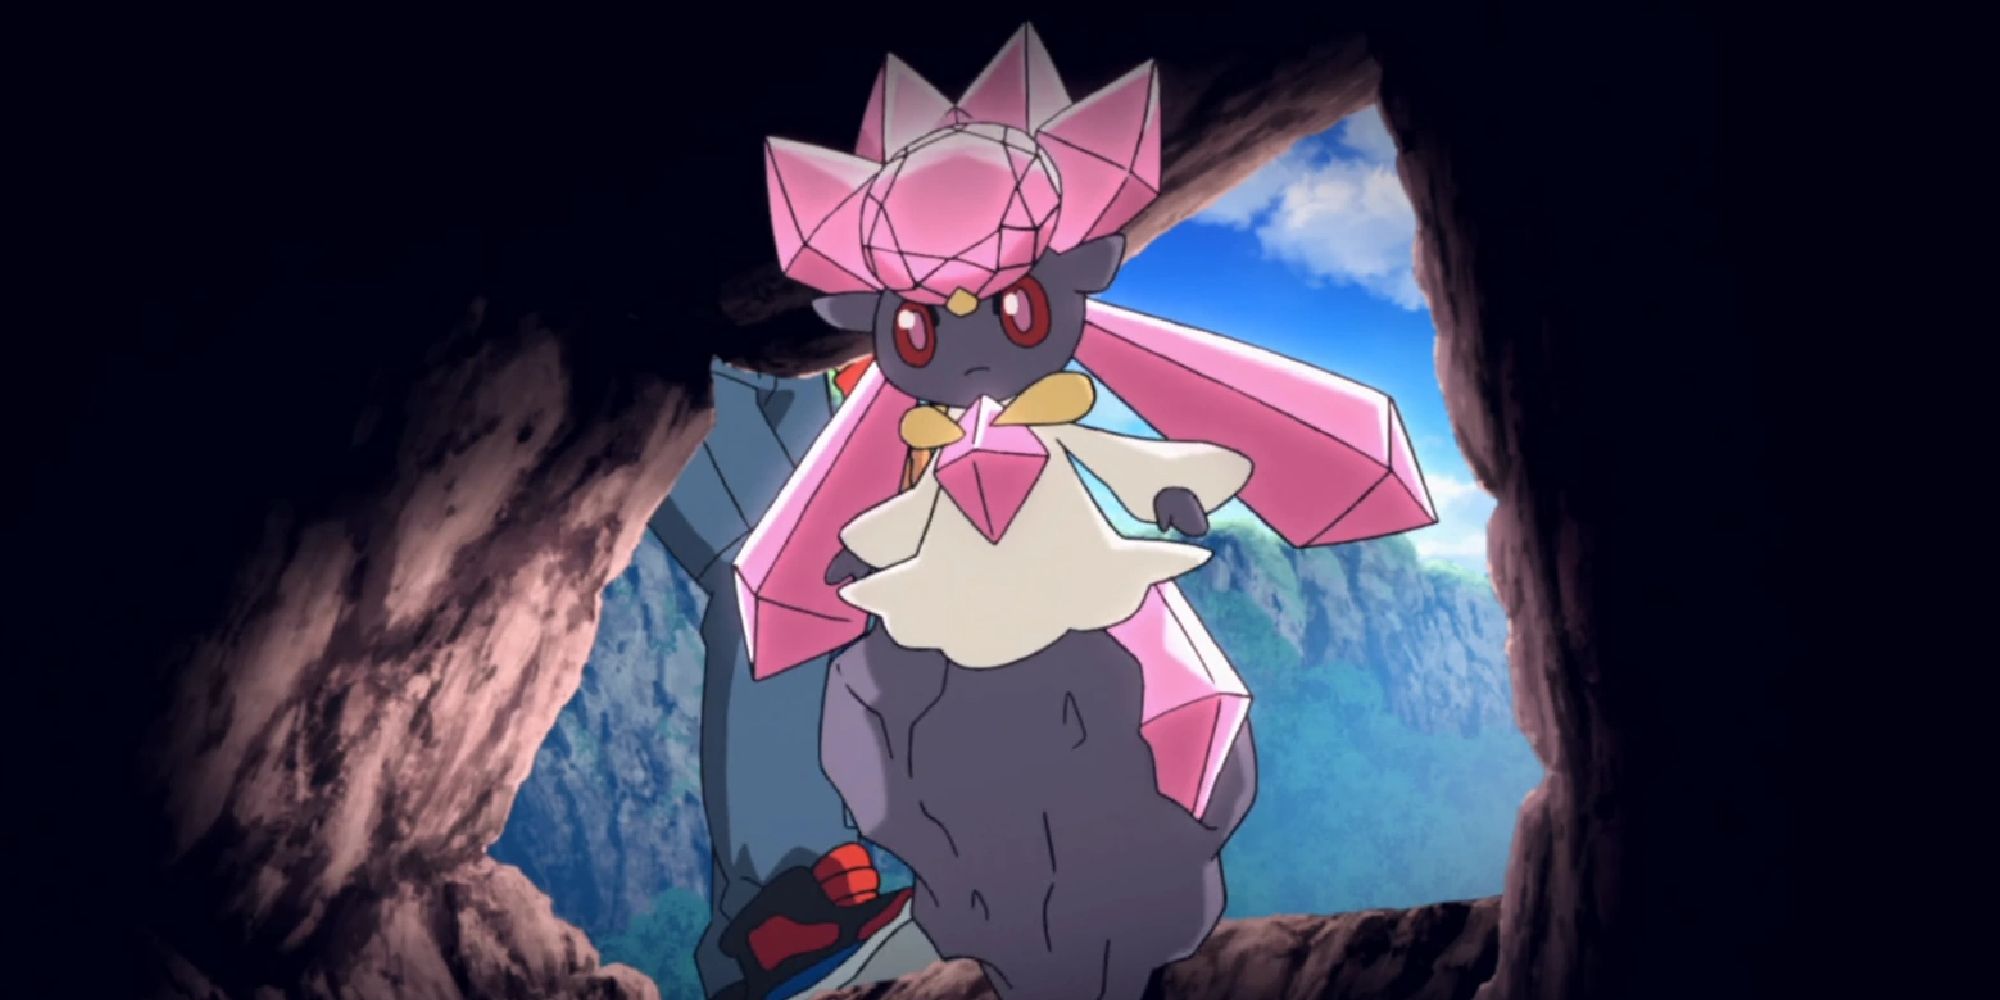 Diancie in a cave entrance in a Pokemon movie